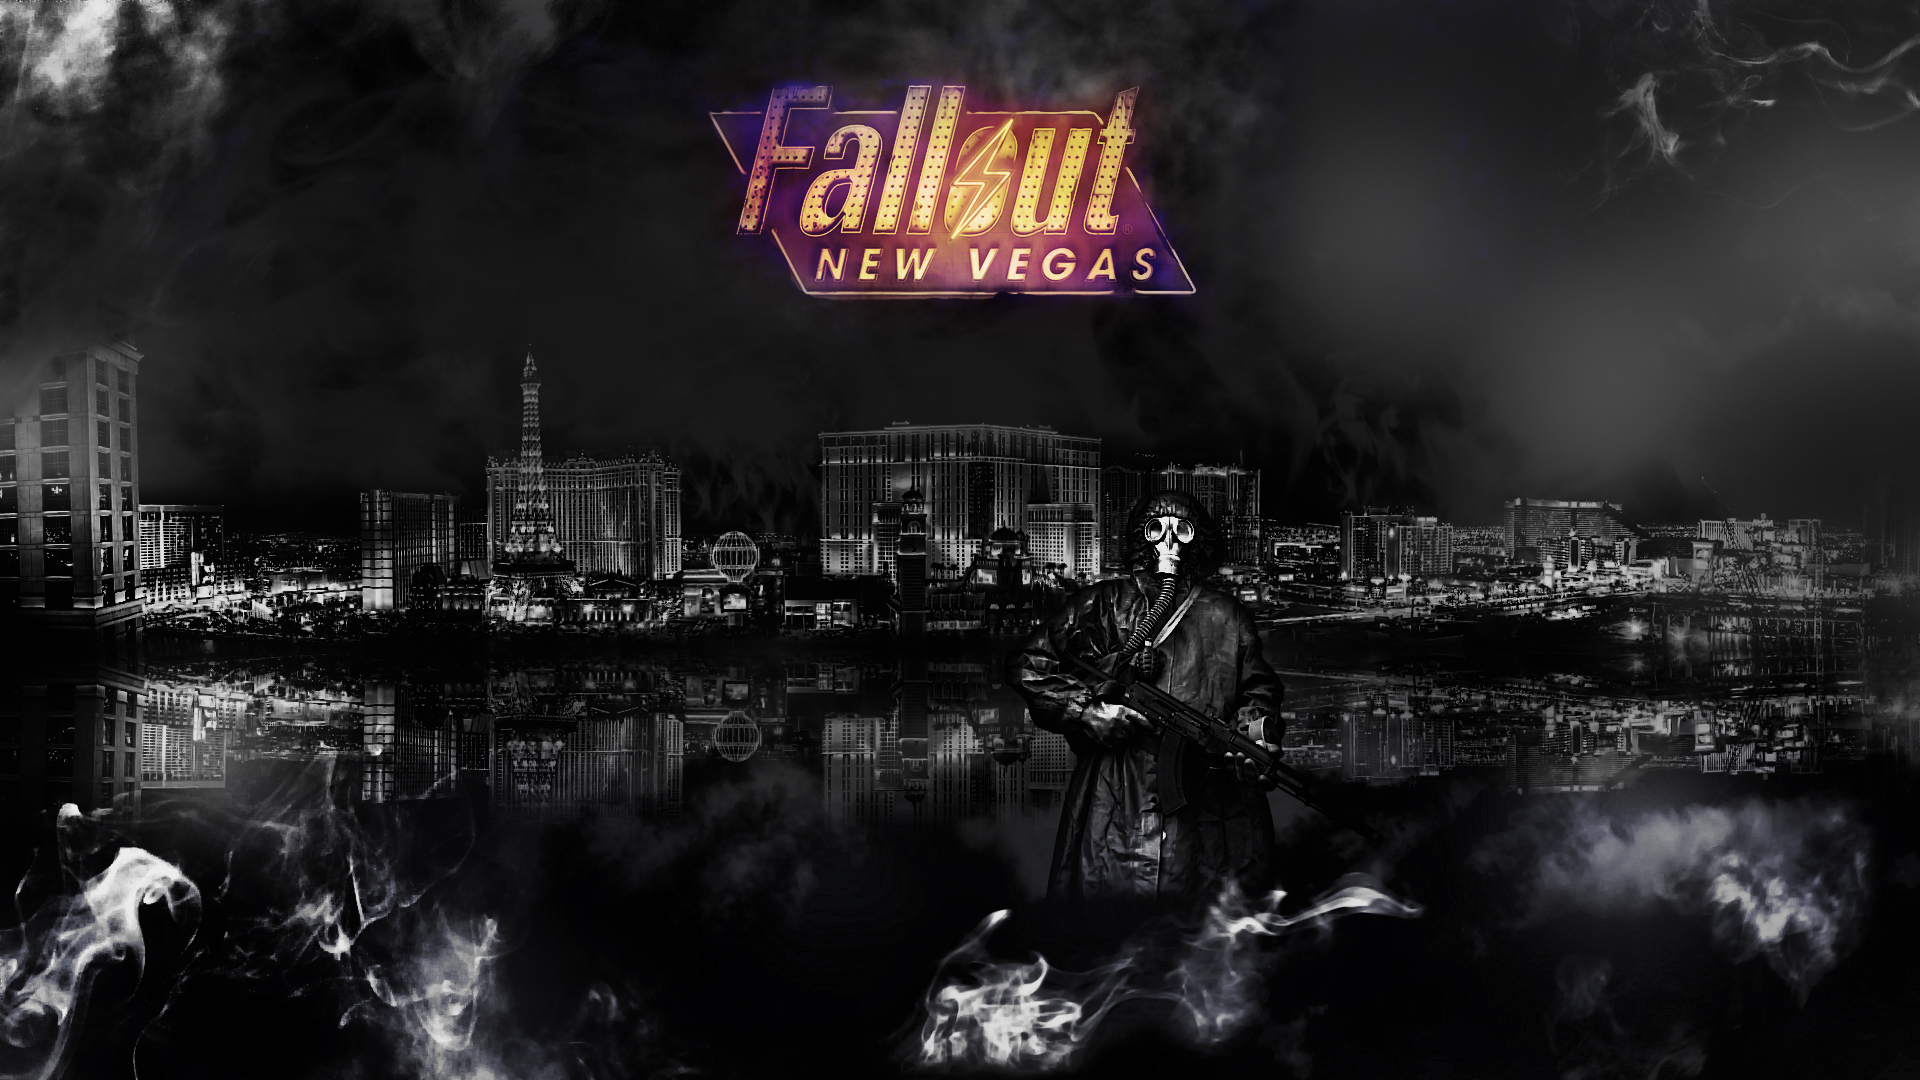 Fallout New Vegas Cool Wallpaper HD Image For